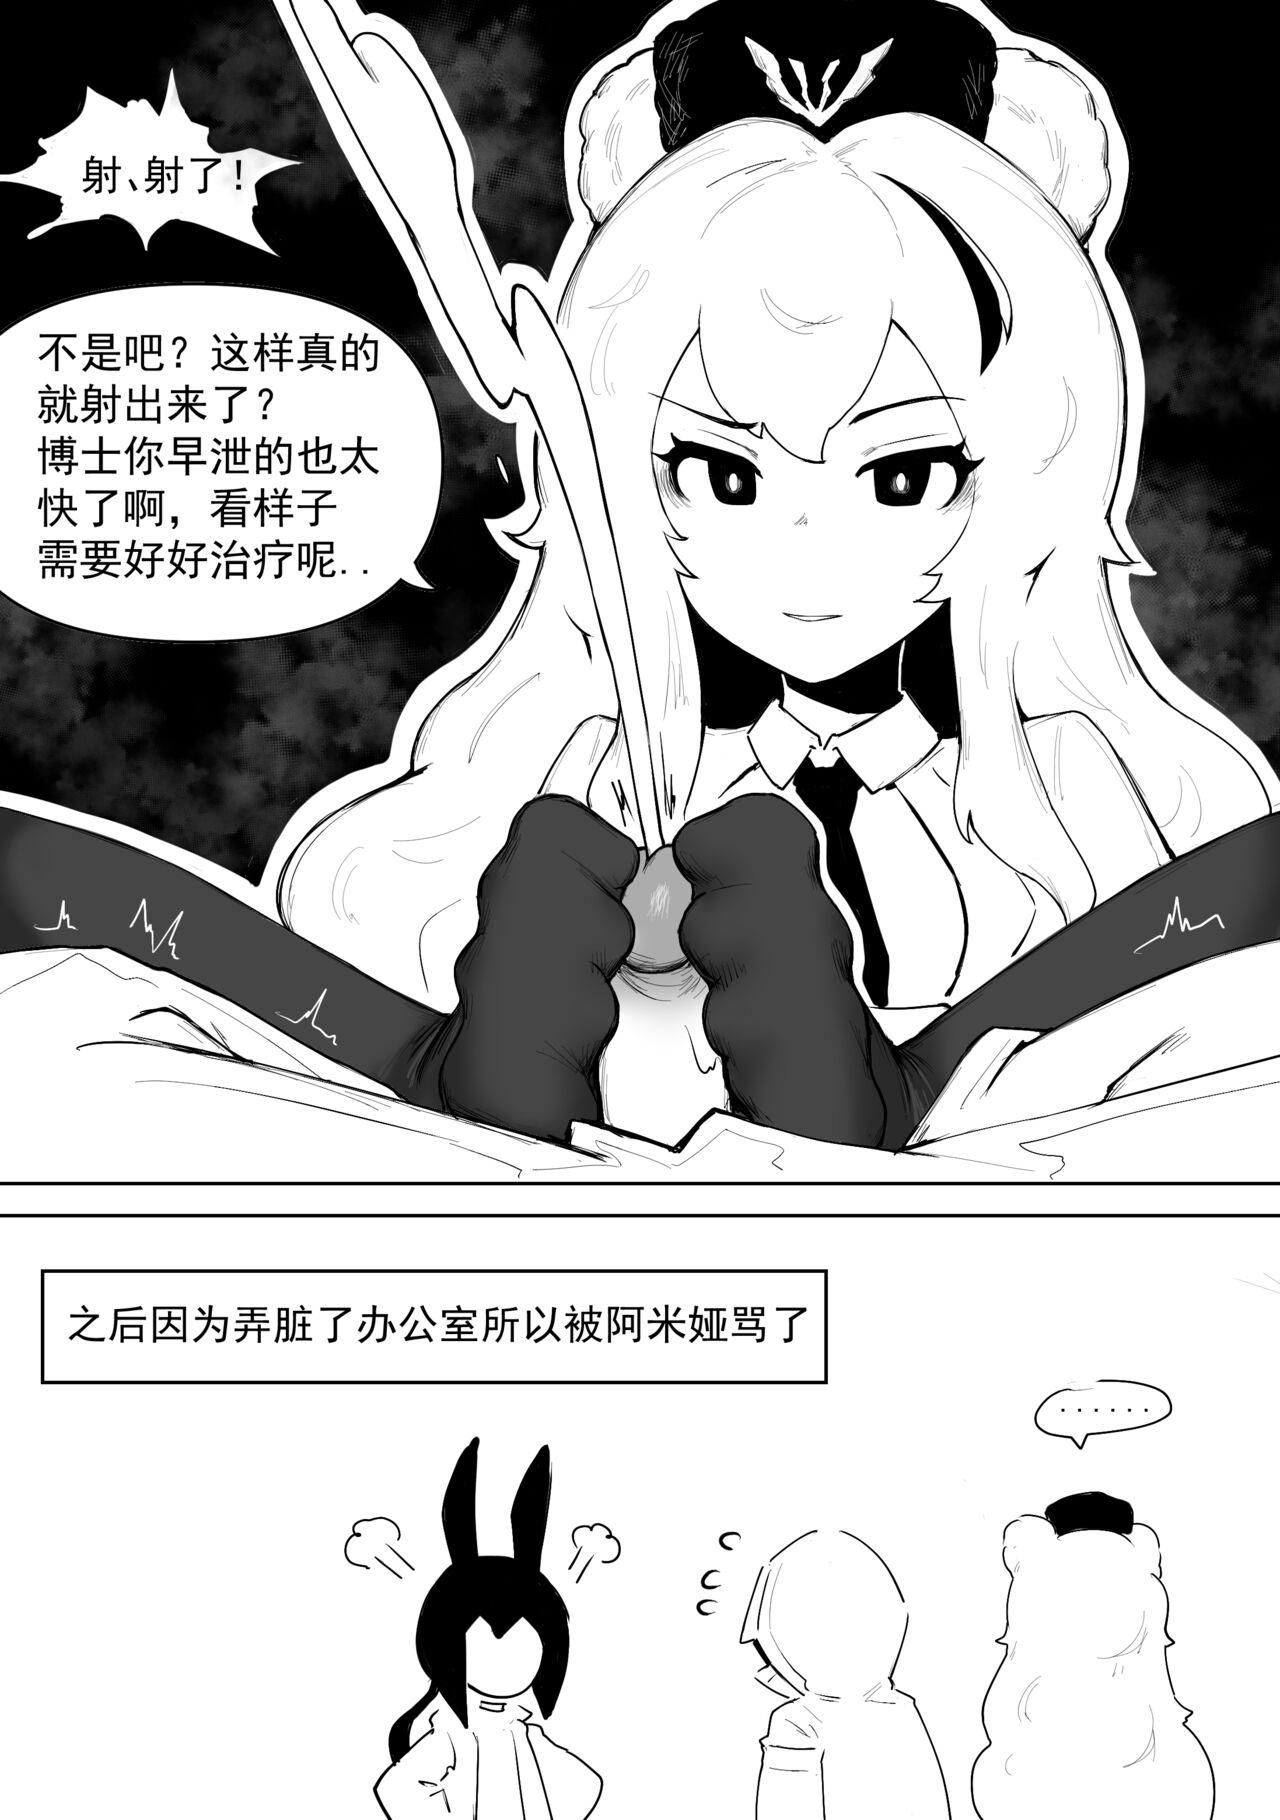 Tiny Girl 澄澈之冰 早露 - Arknights Athletic - Page 6